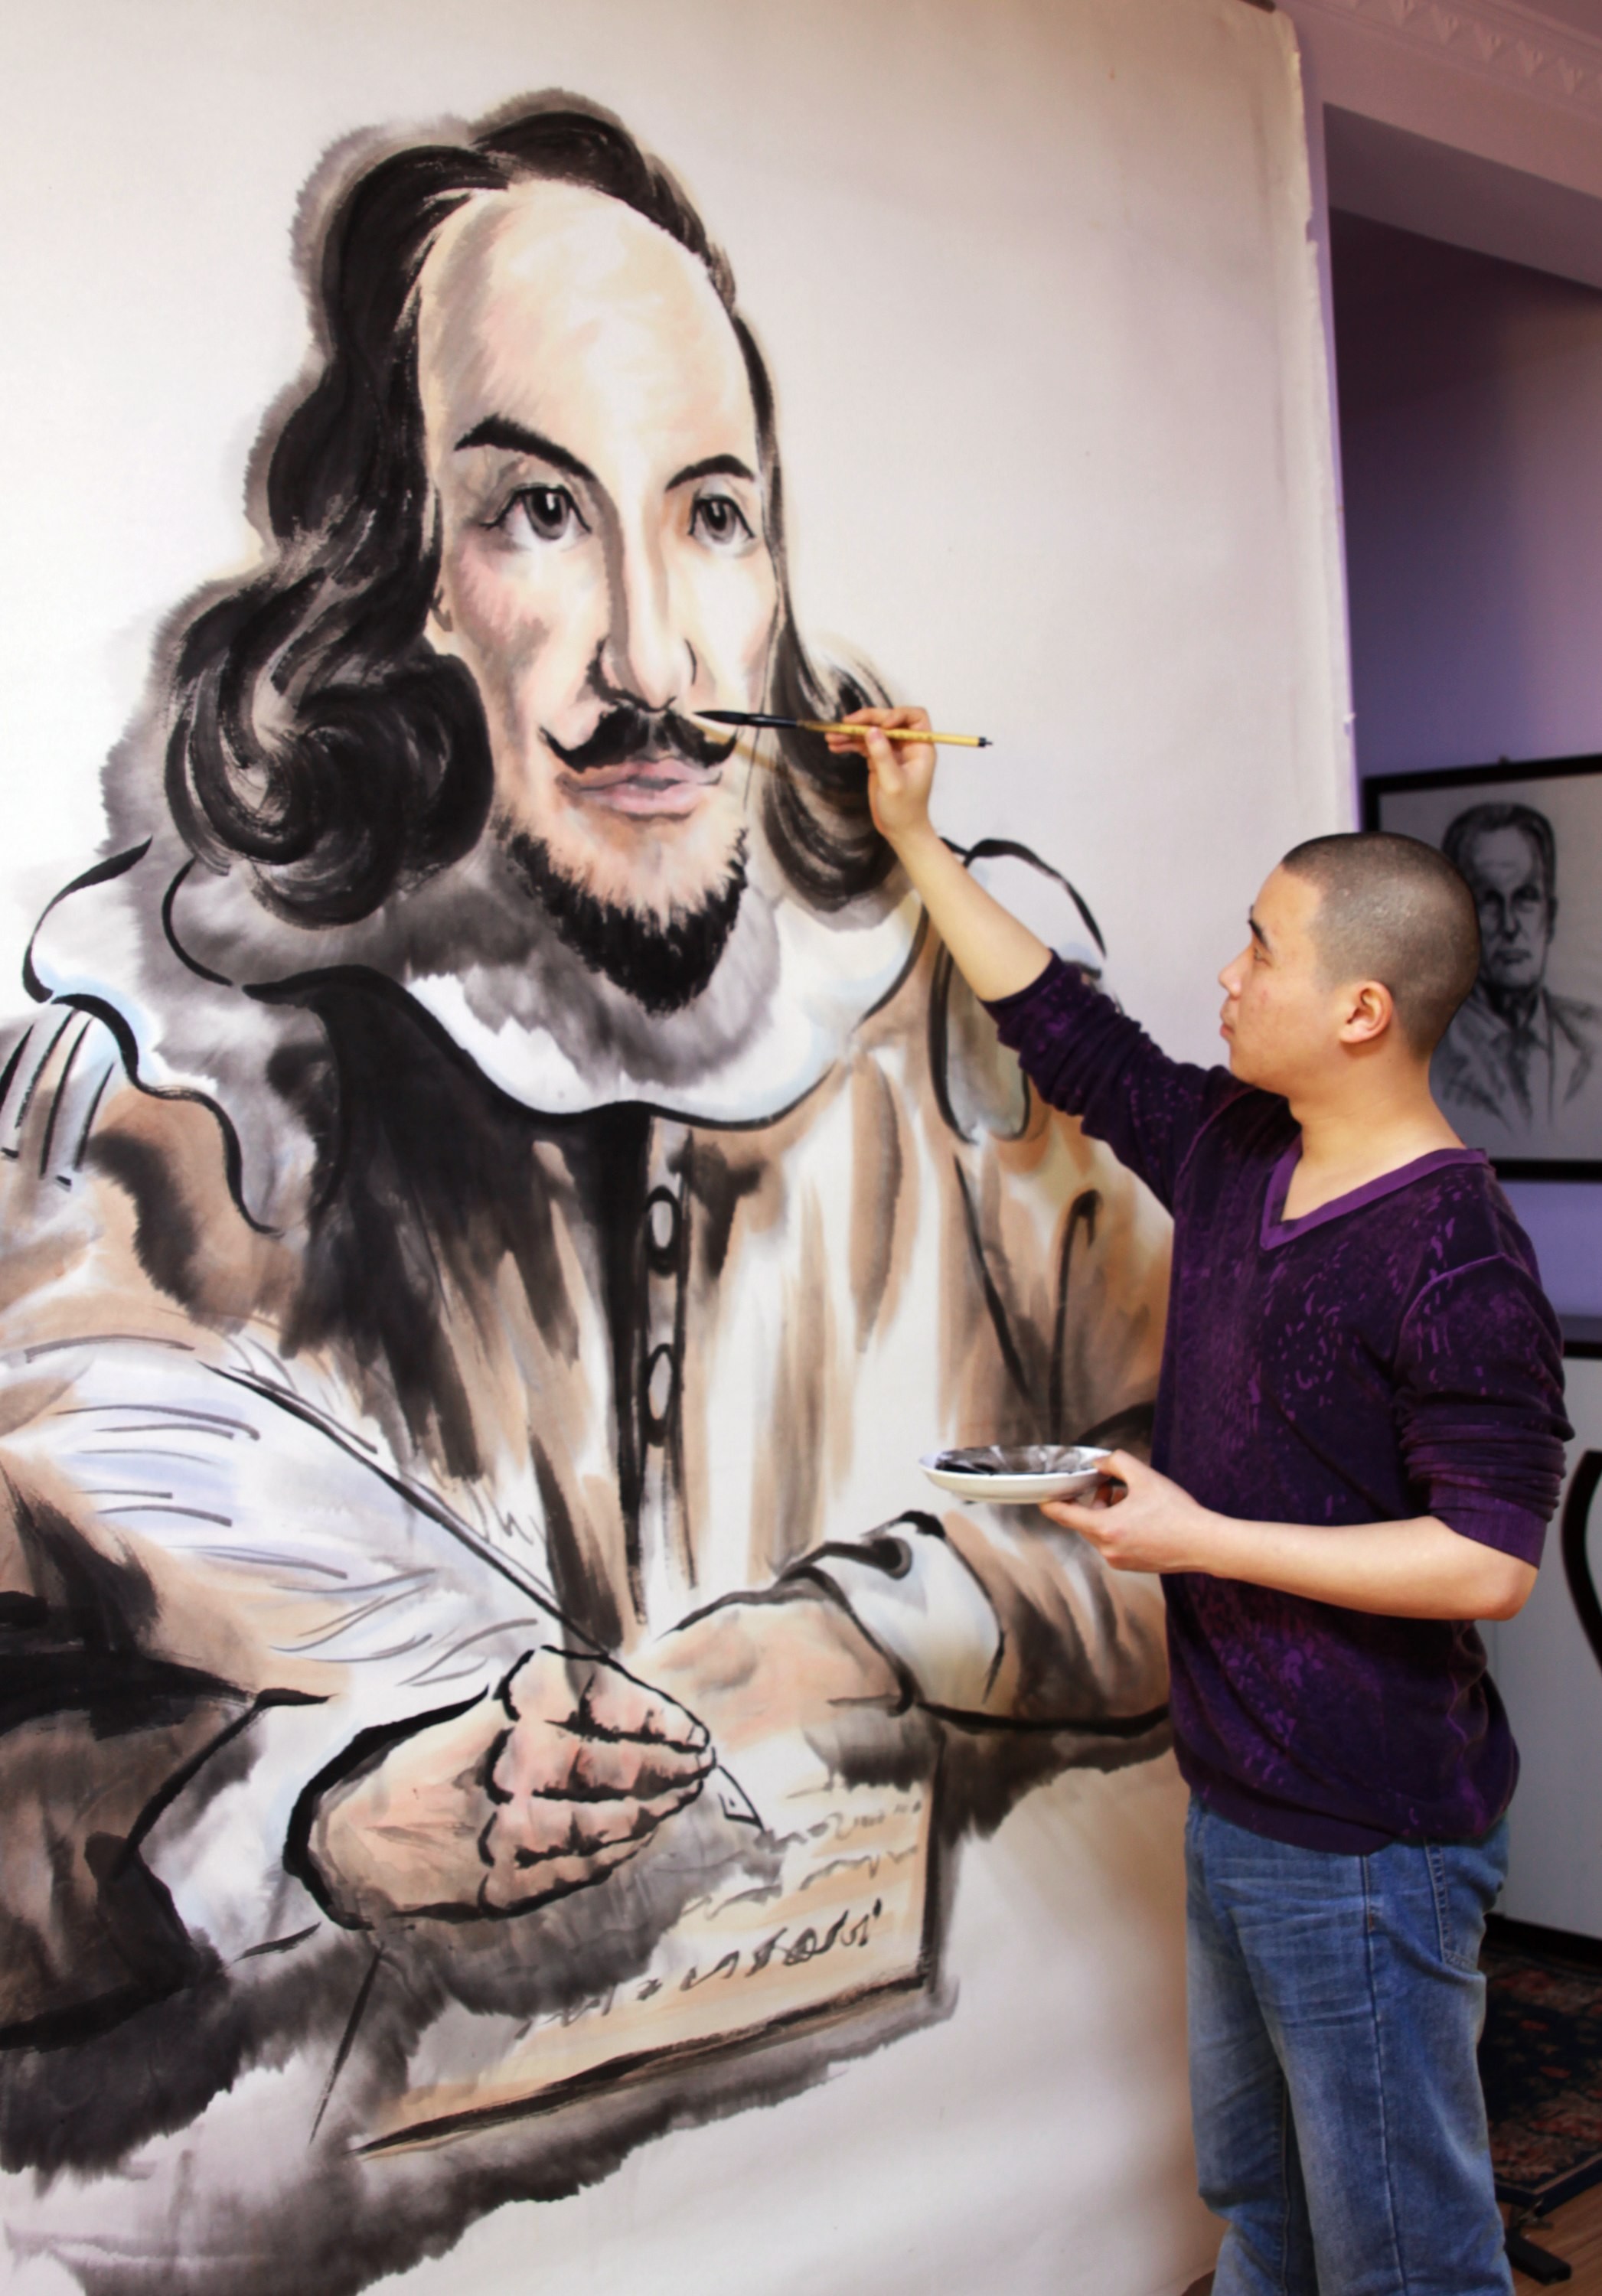 Young painter Wang Bo creates large ink portrait of Shakespeare in Meishan, Sichuan Province. /CNSPHOTO